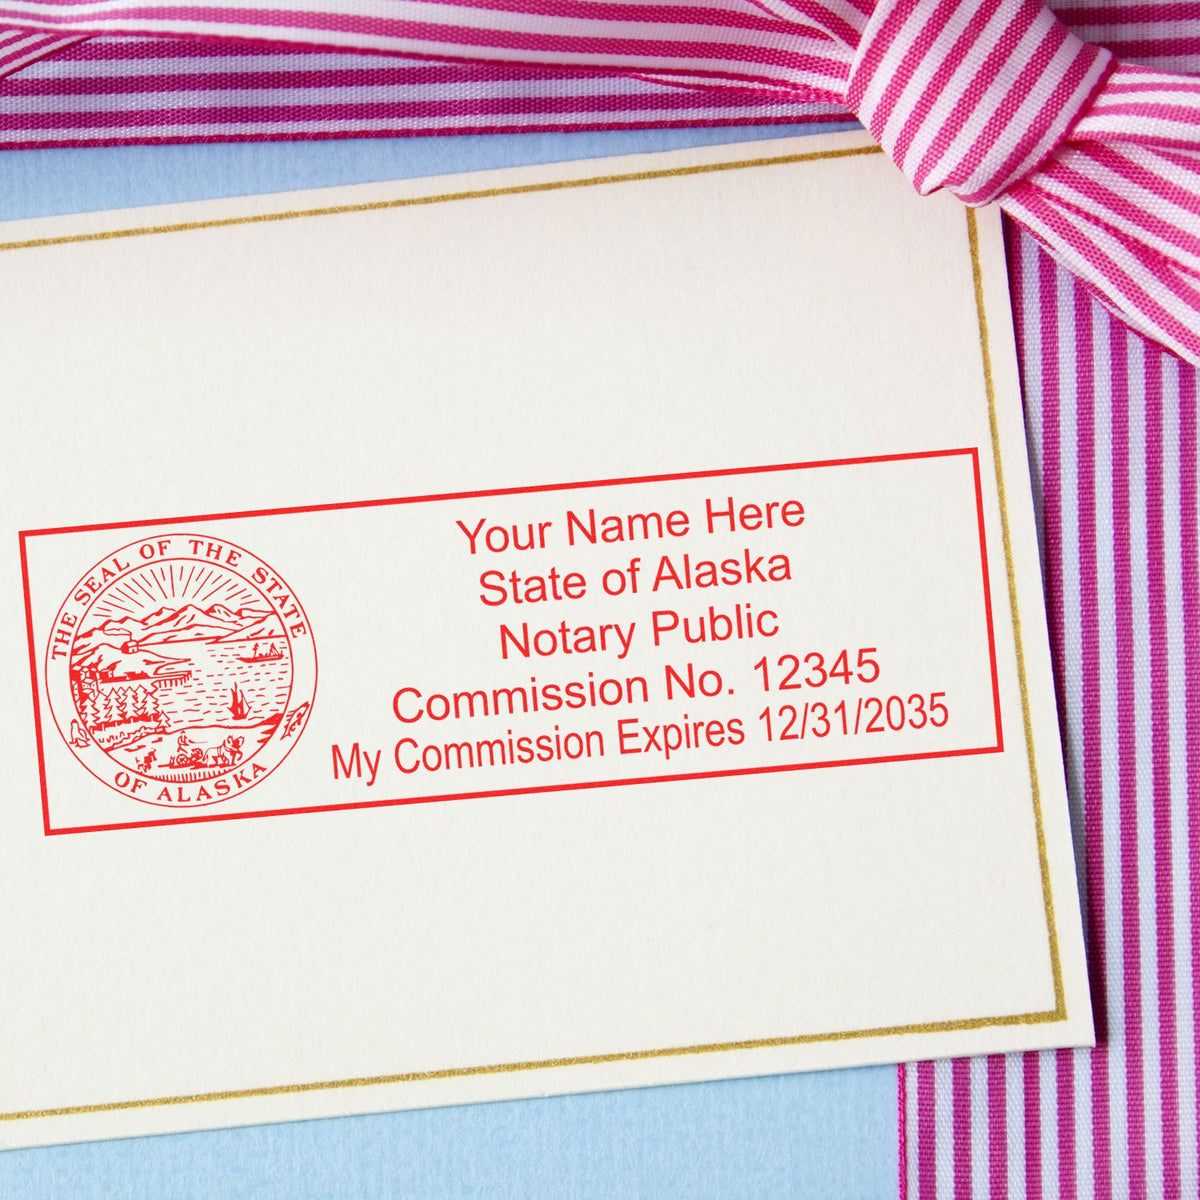 The Self-Inking State Seal Alaska Notary Stamp stamp impression comes to life with a crisp, detailed photo on paper - showcasing true professional quality.